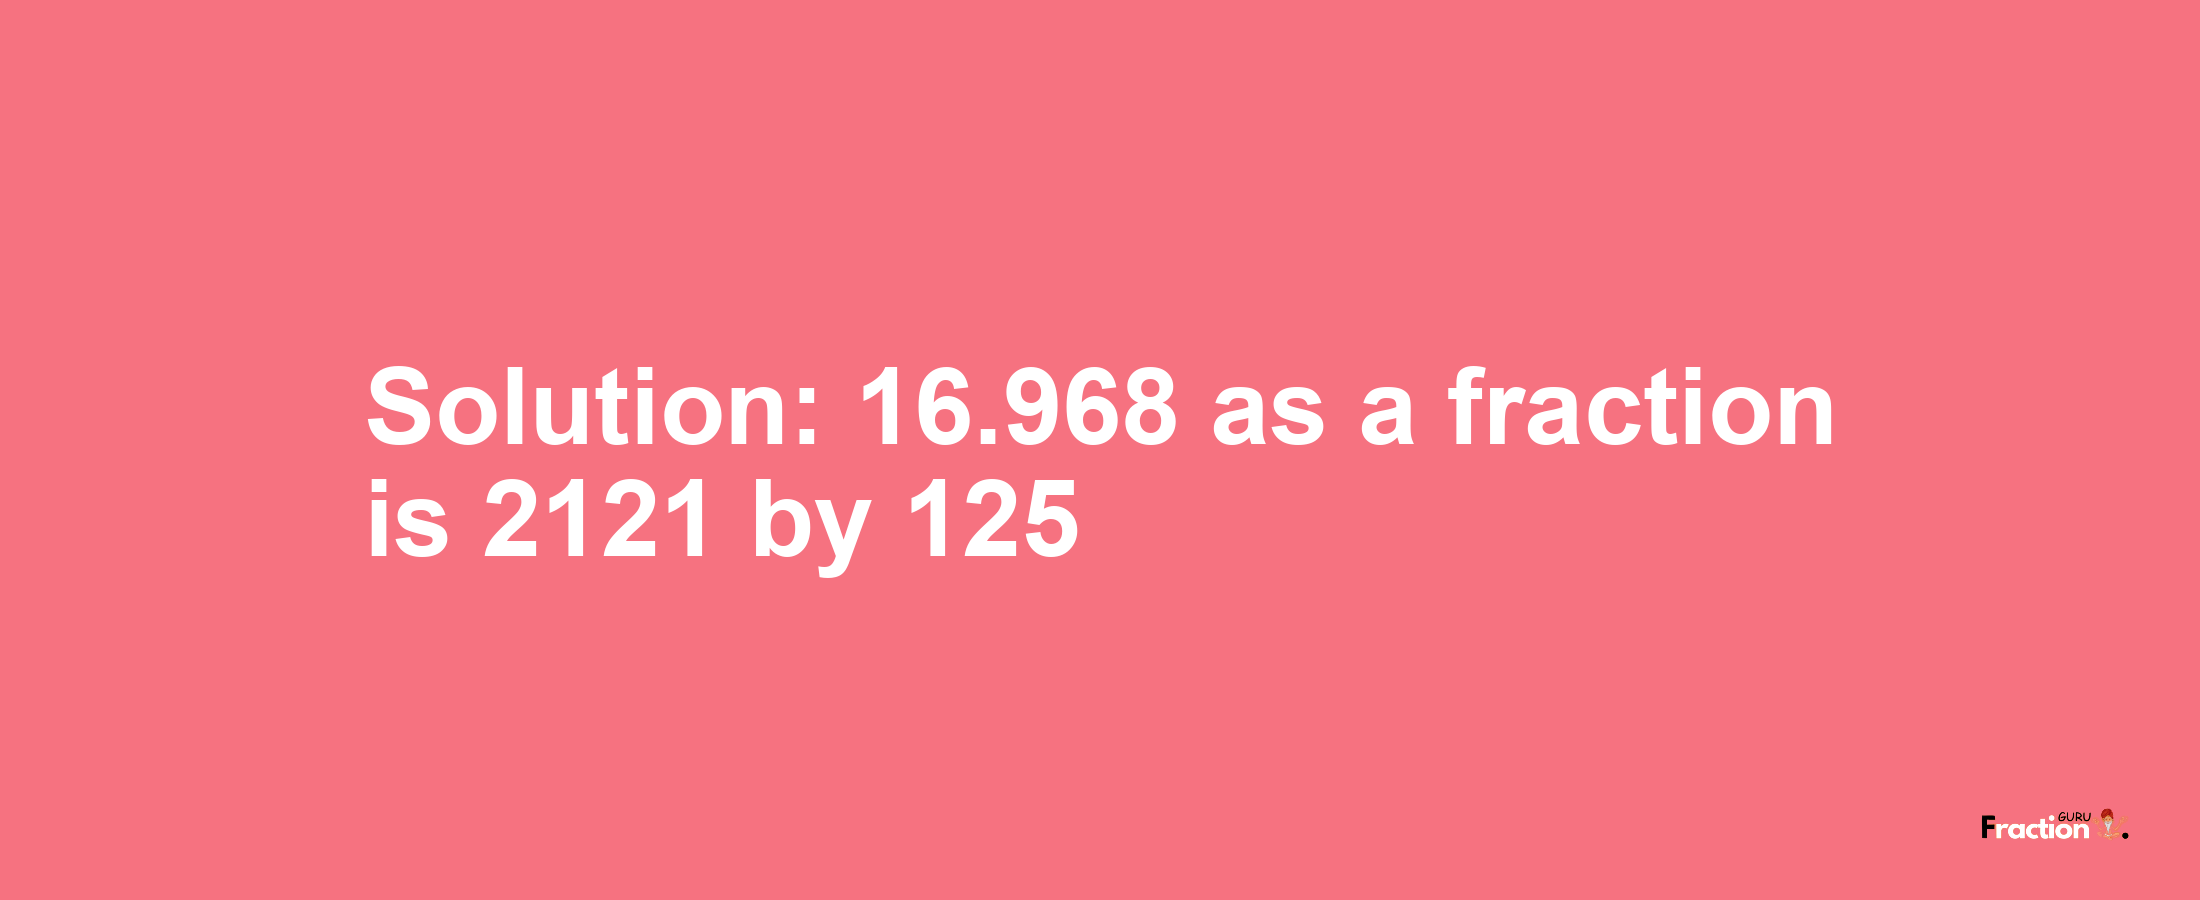 Solution:16.968 as a fraction is 2121/125